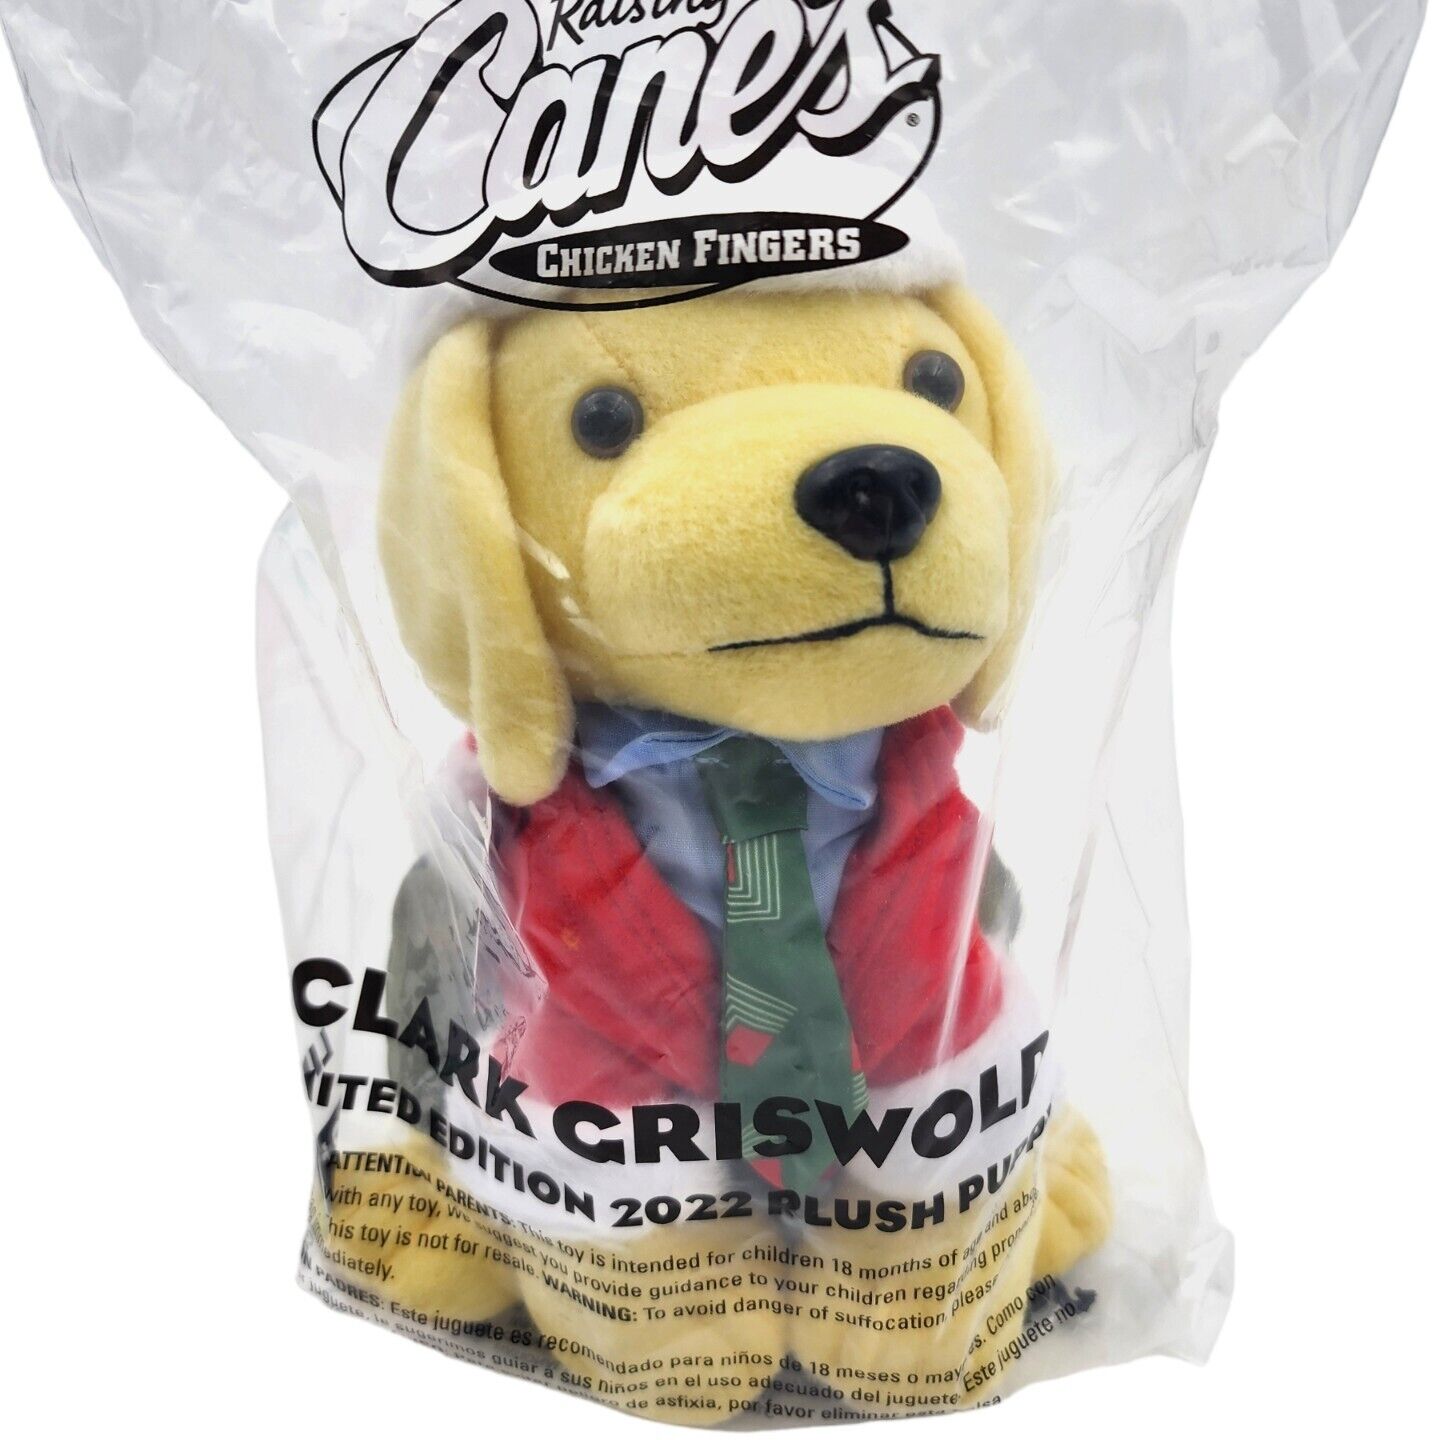 Raising Canes Christmas Vacation Clark Griswold Squirrel Plush Dog 2022